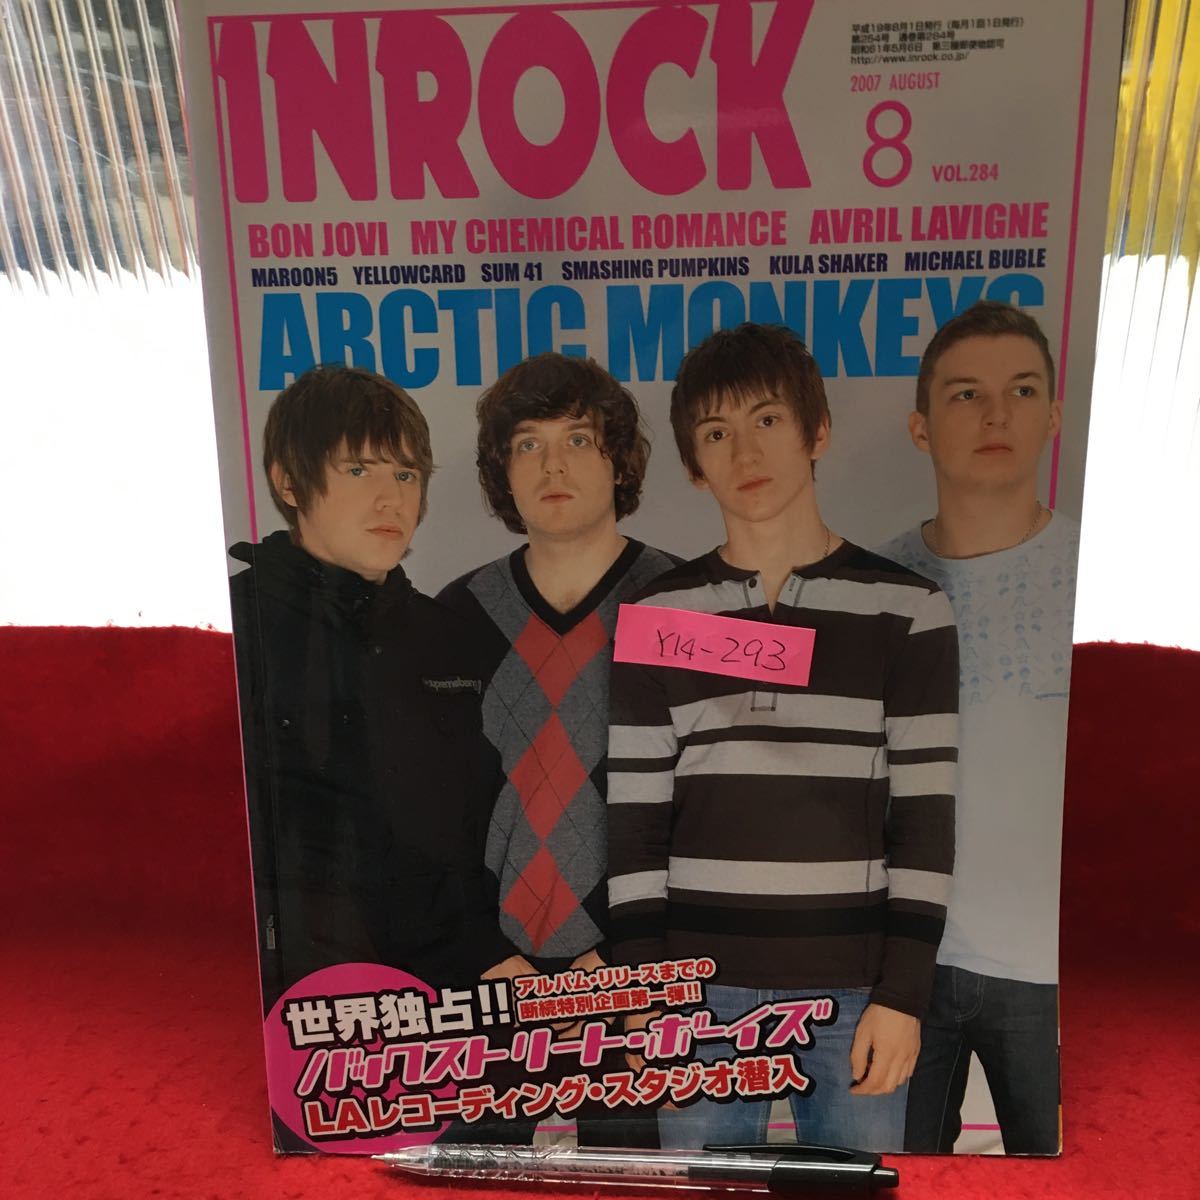 Y14-293 "In Rock August Issue Vol.284 Published In 19 Back Straight Boys Infiltrate LA Recording Studio Publisher / In Rock 